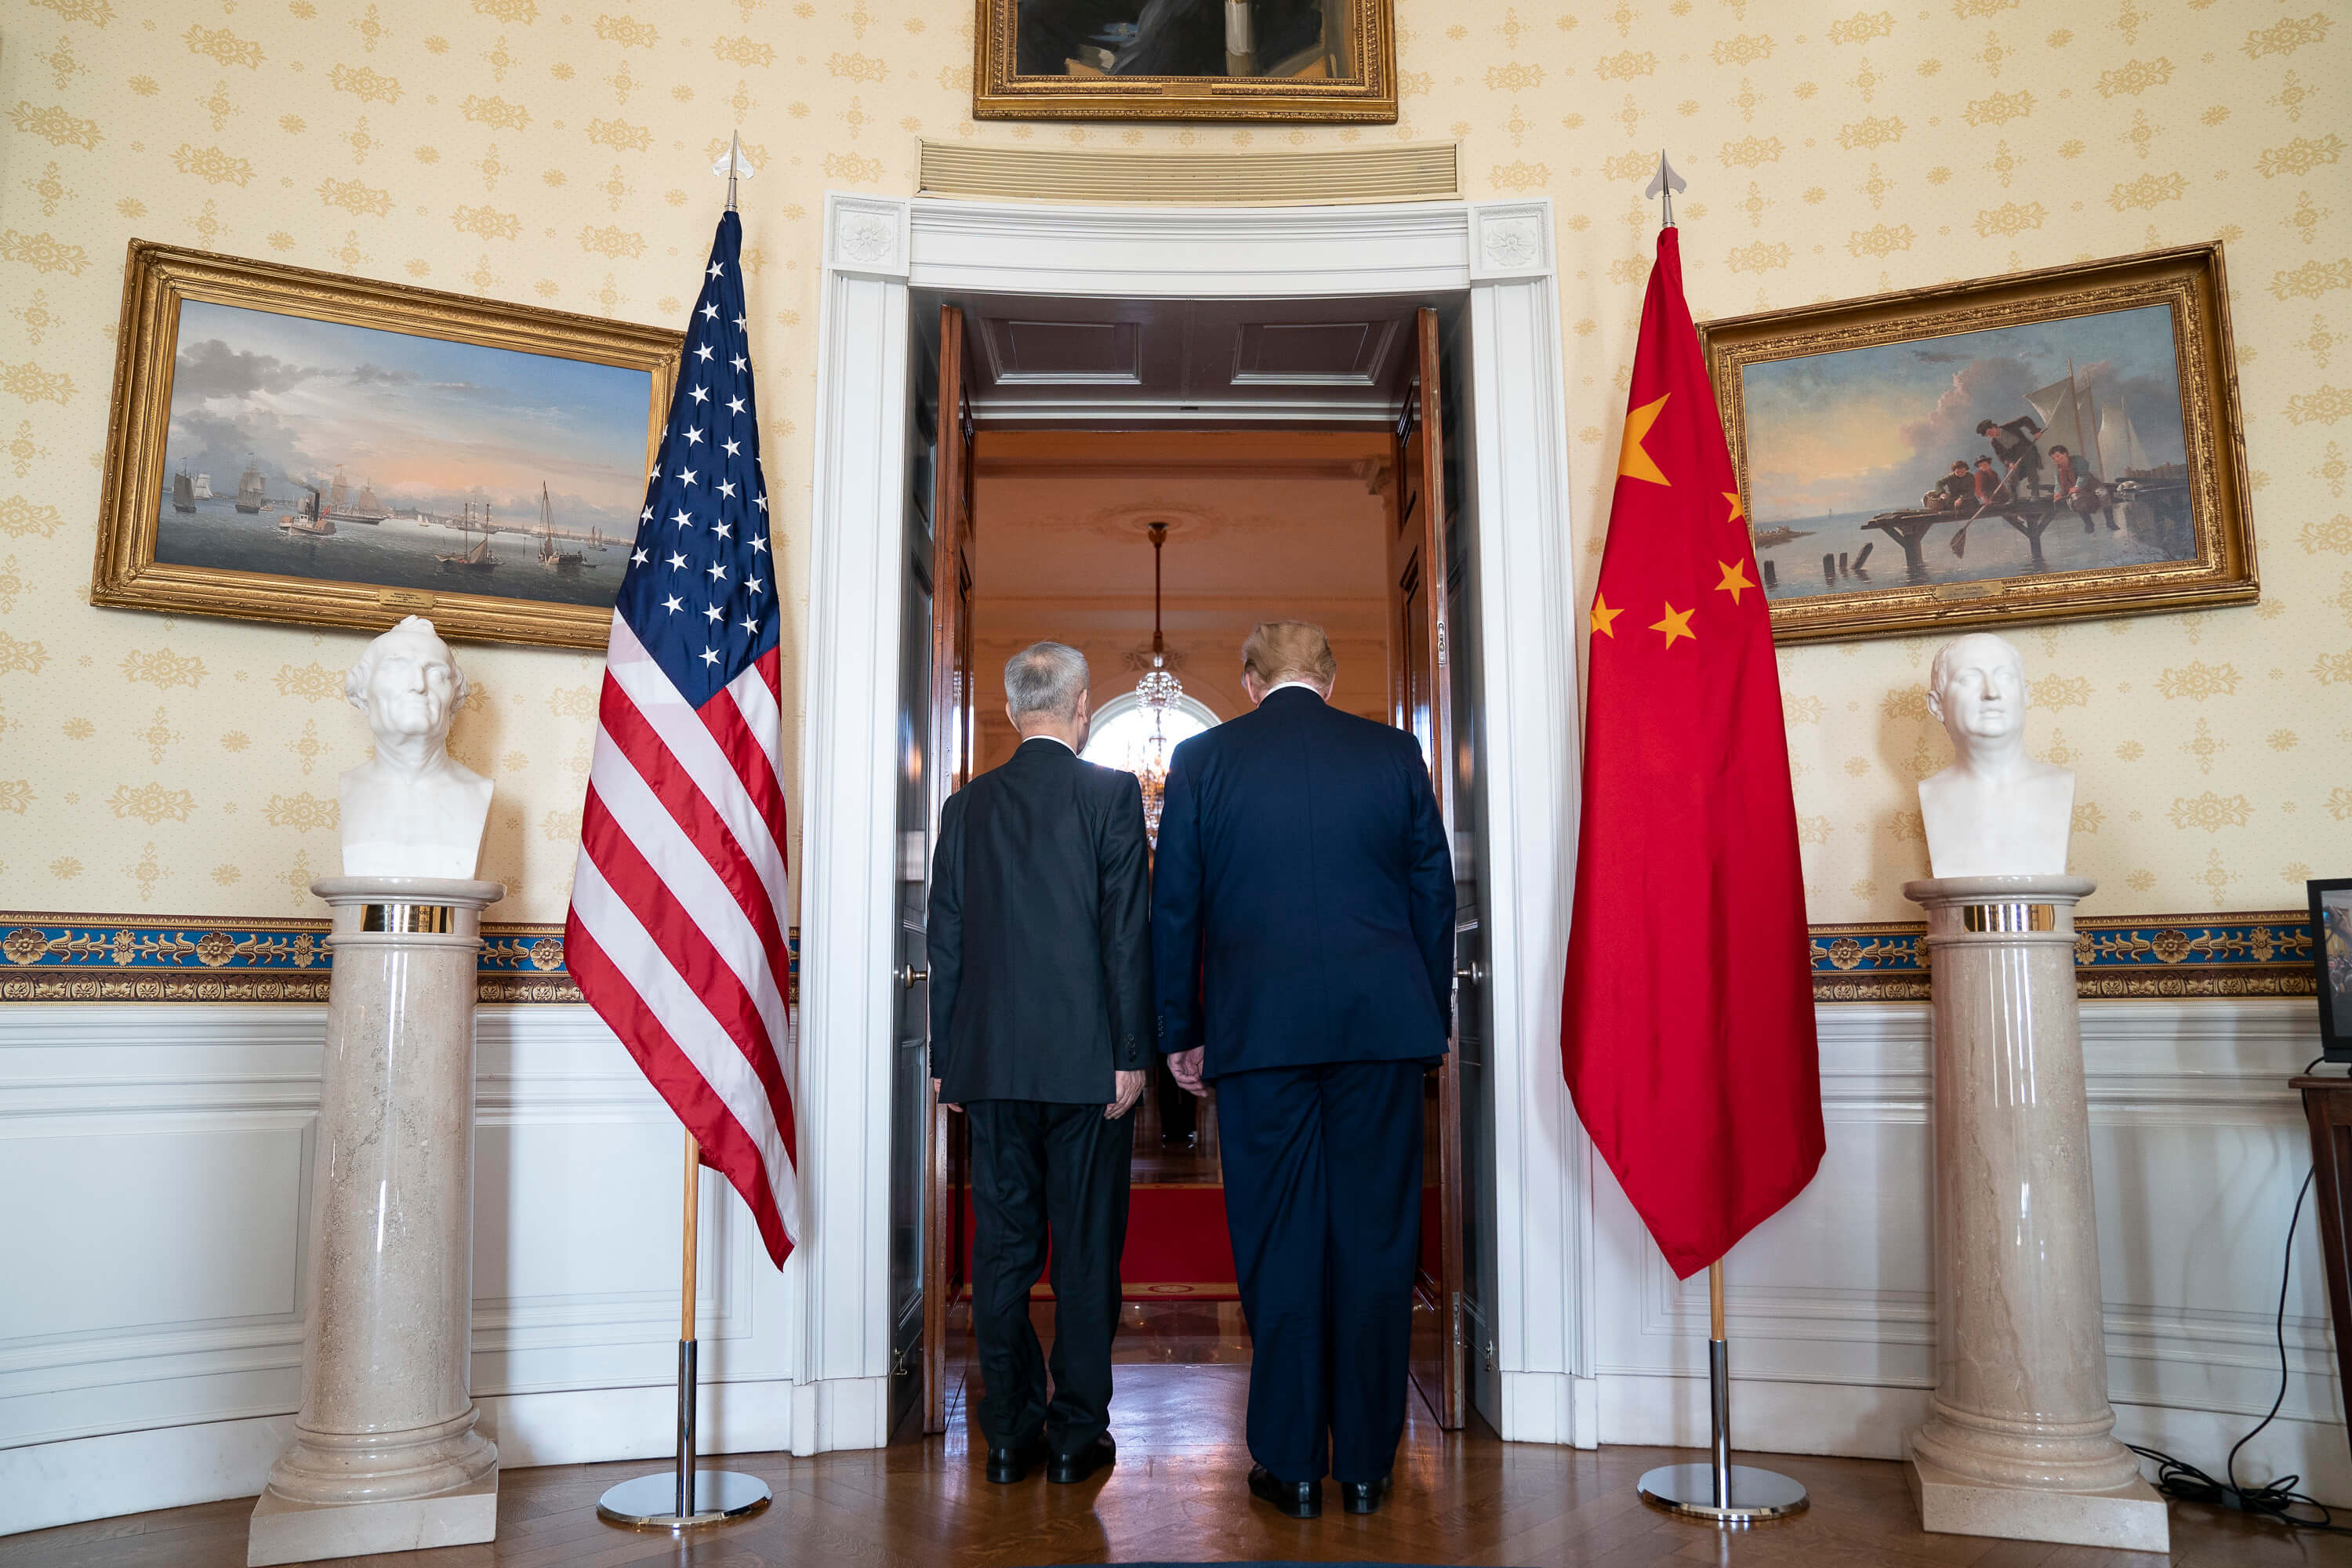 President Donald Trump and Chinese Vice Premier Liu He prepare to attend the signing ceremony for the U.S. China Phase One Trade Agreement Jan. 15, 2020, at the White House. © The White House/Flickr